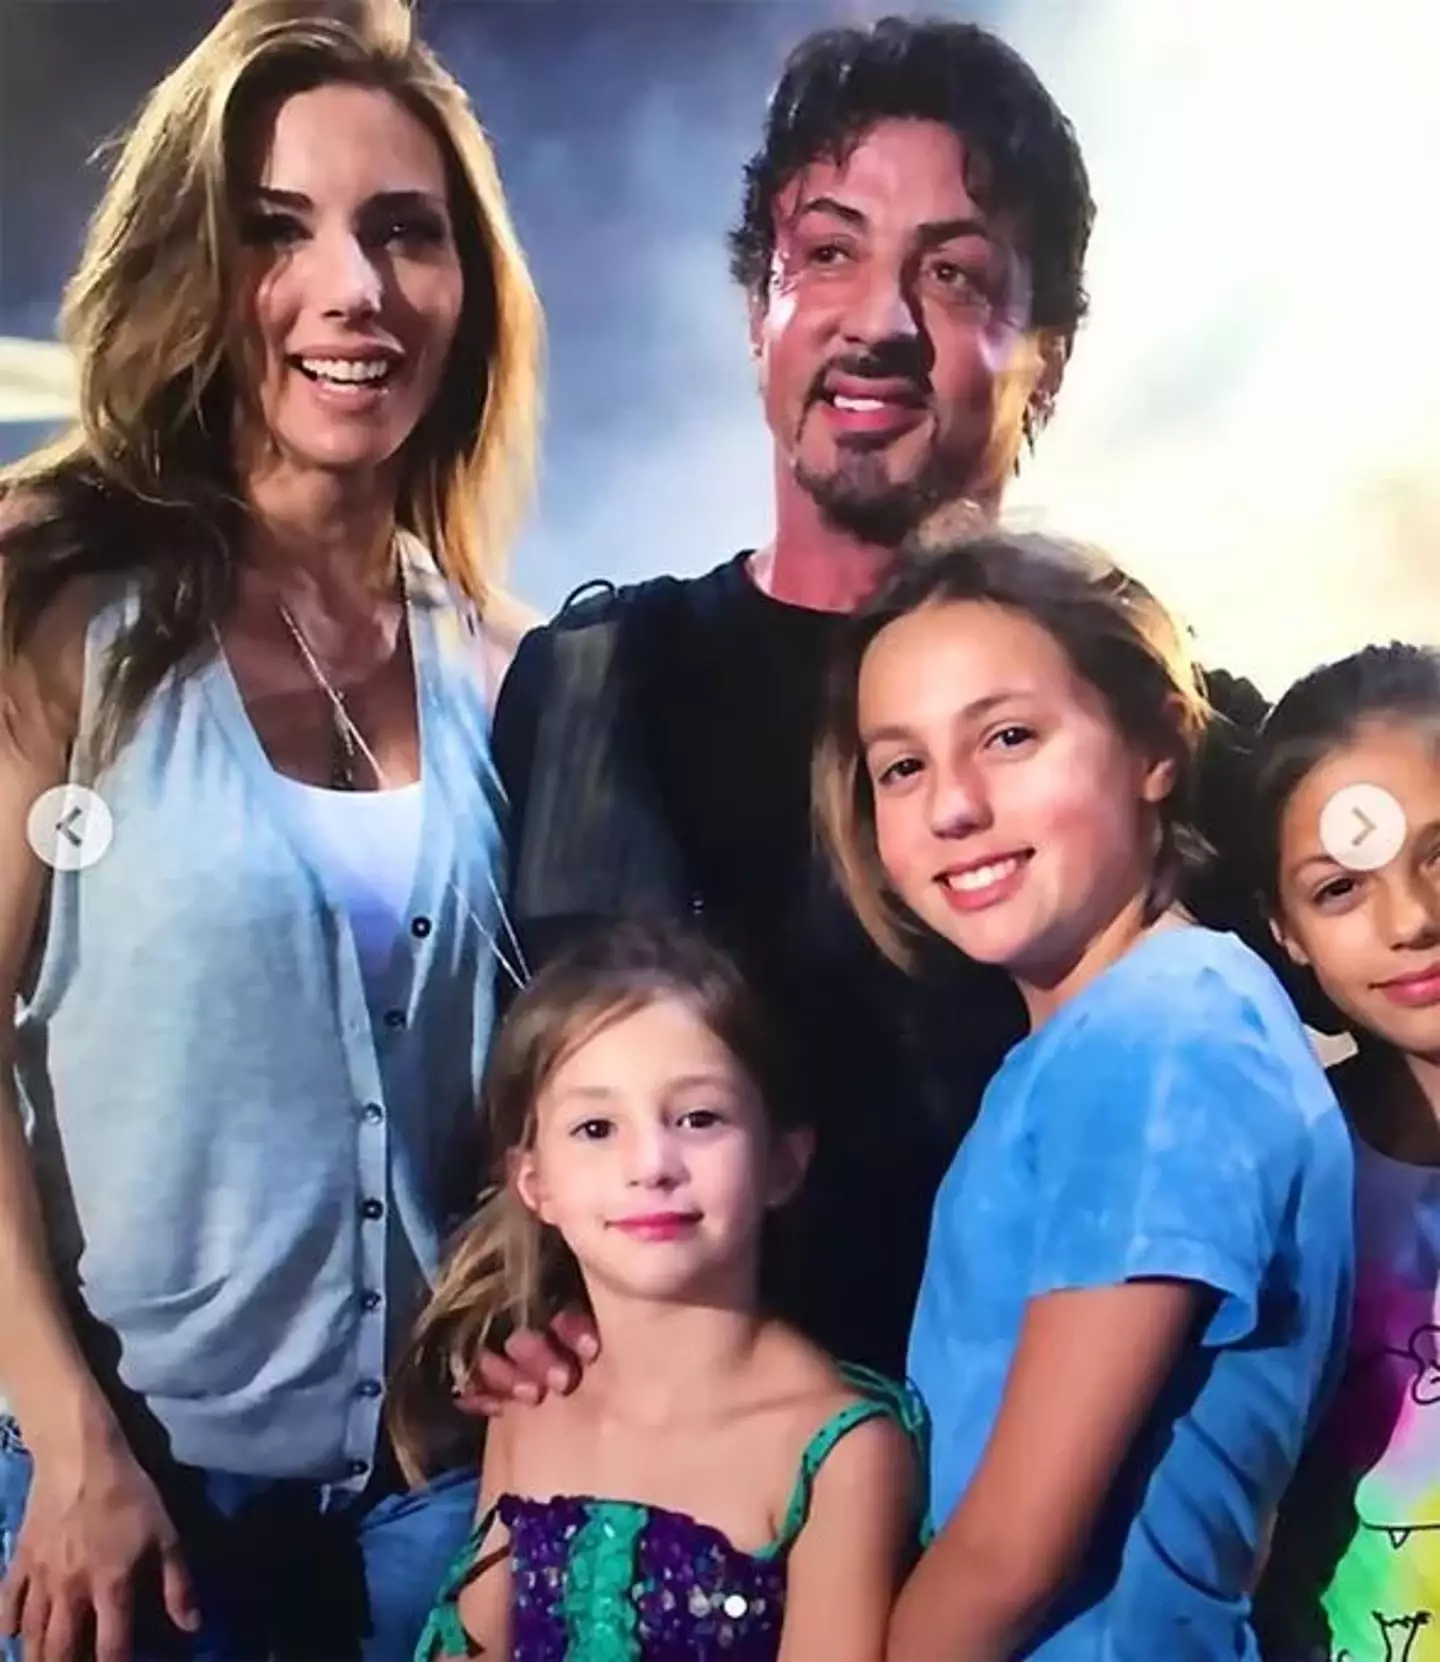 Stallone shared a nostalgic shot of his family on Instagram.